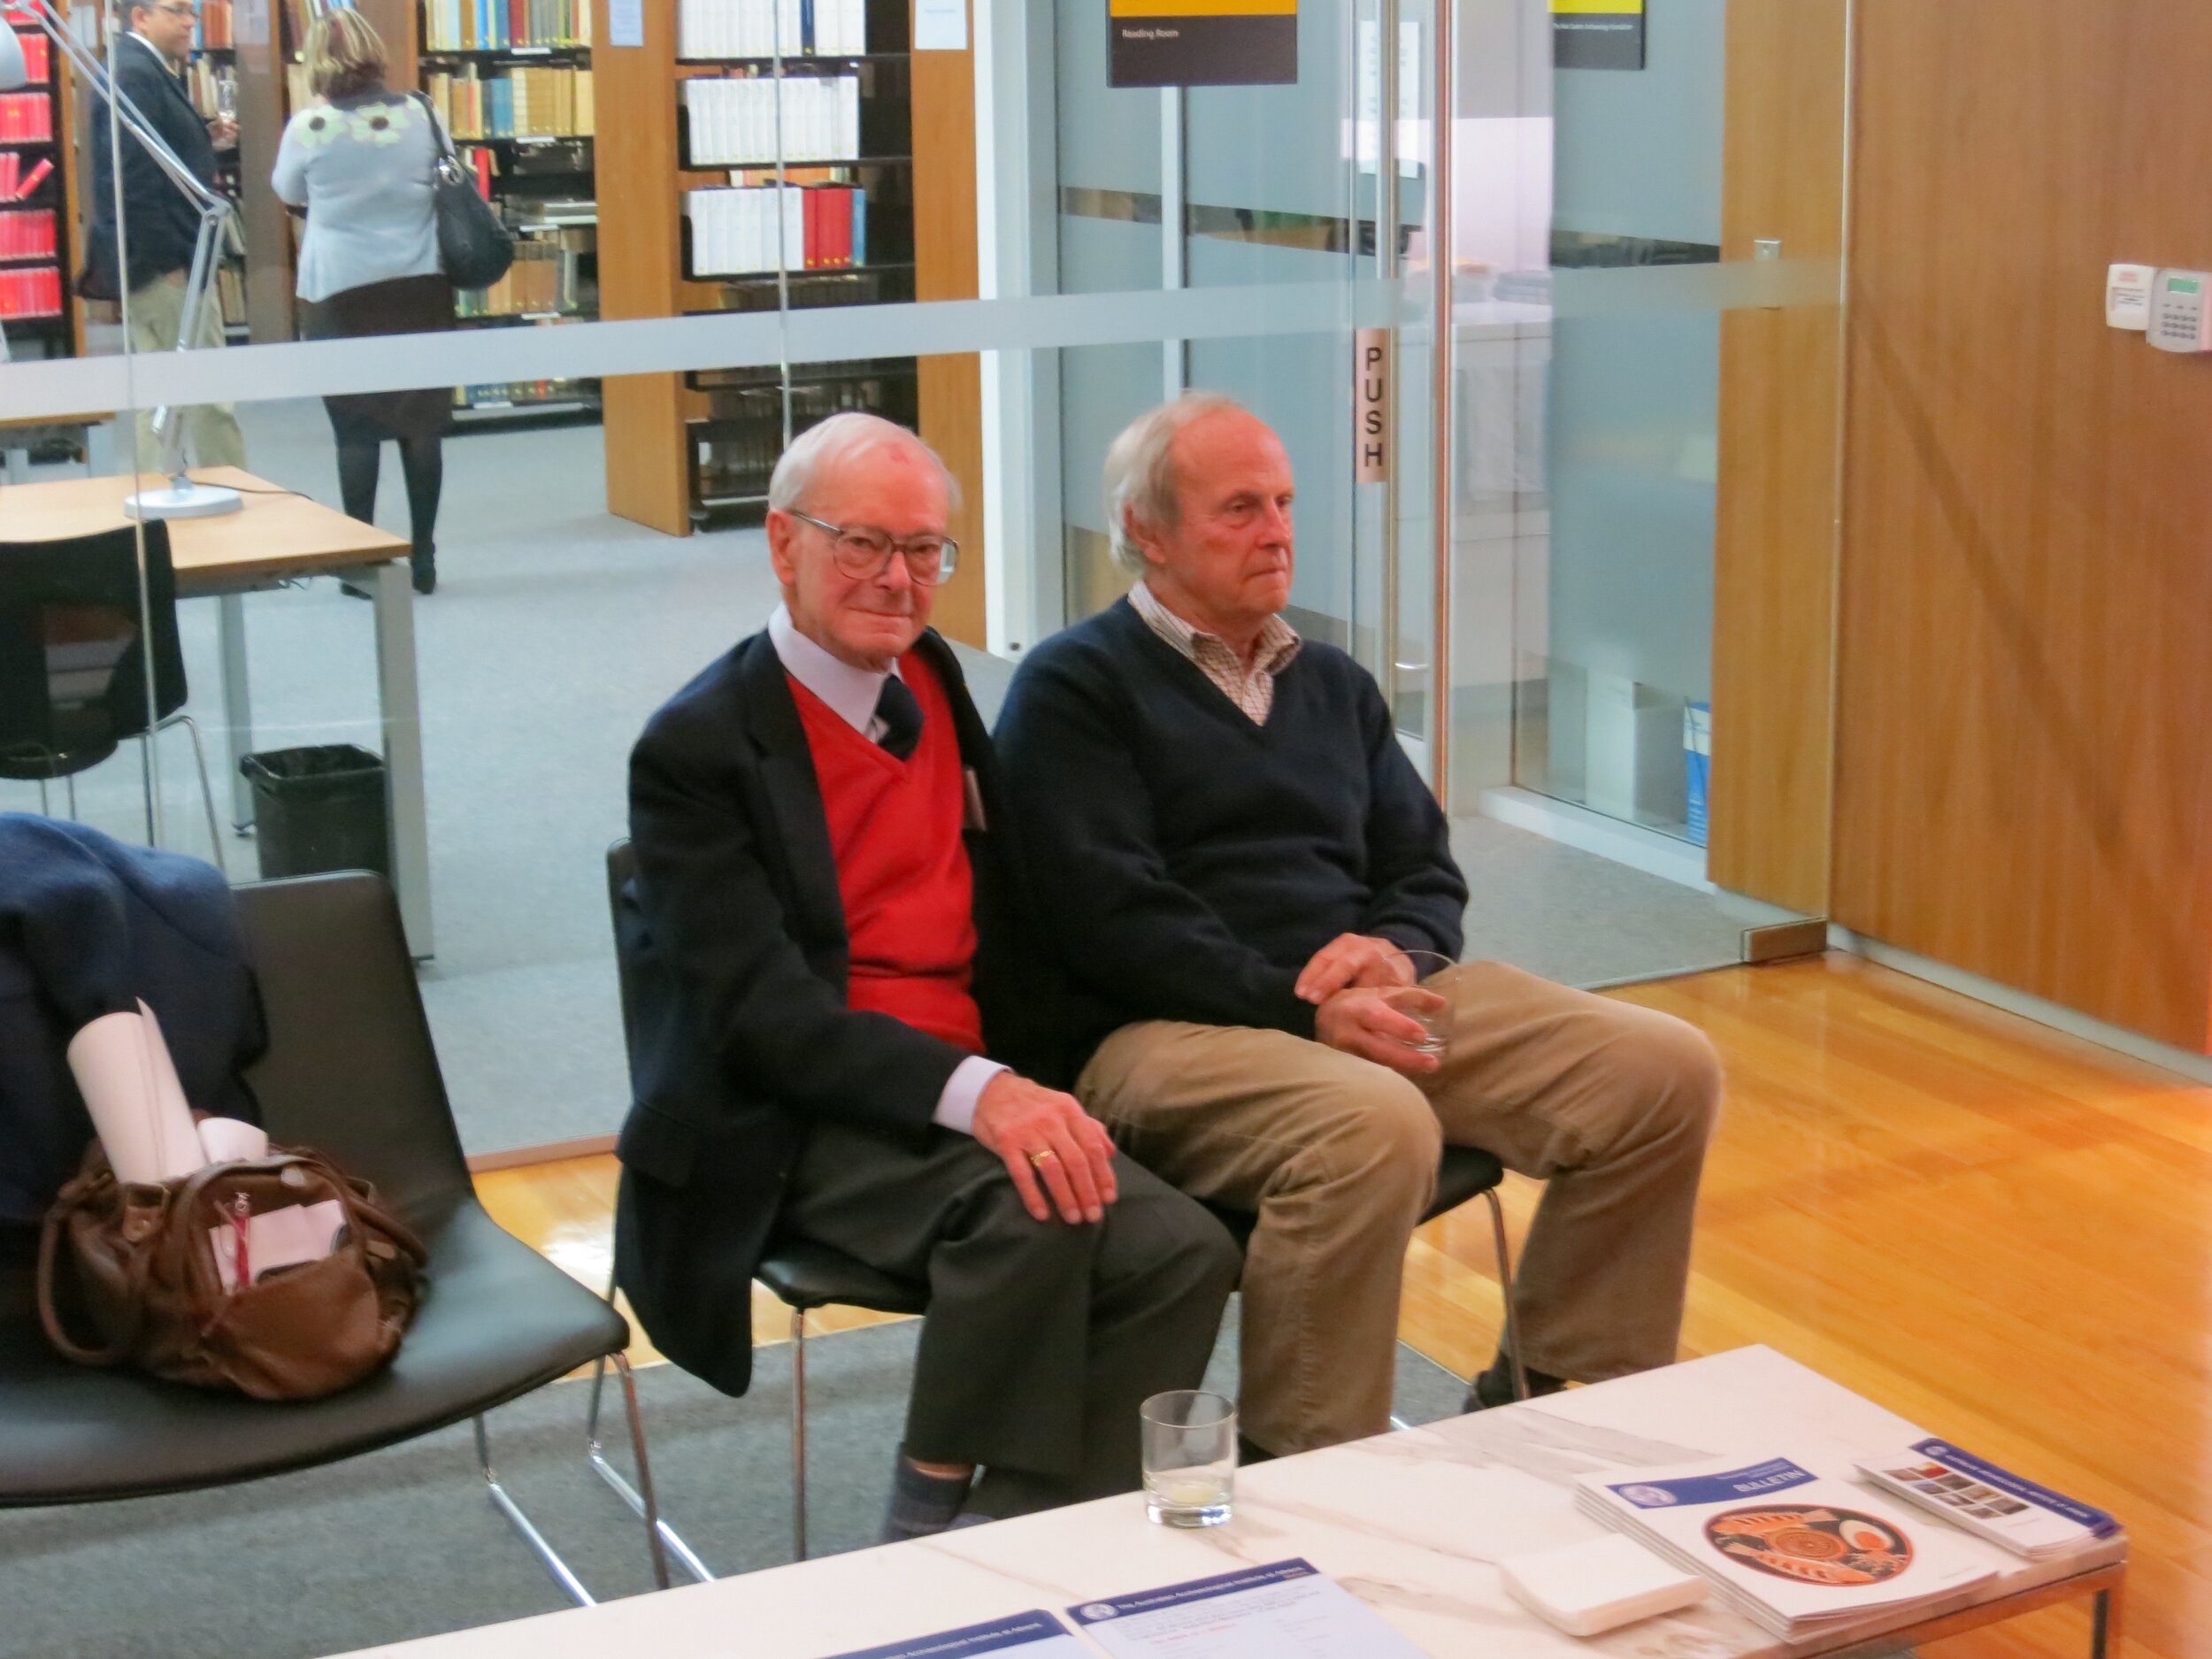  From left: the late Prof. Alexander Cambitoglou with Dr. John Tidmarsh at the opening of  Response to Cyprus,  10 July 2013. The event was hosted by the Australian Archaeological Institute at Athens (AAIA) at the Centre of Classical and Near Eastern